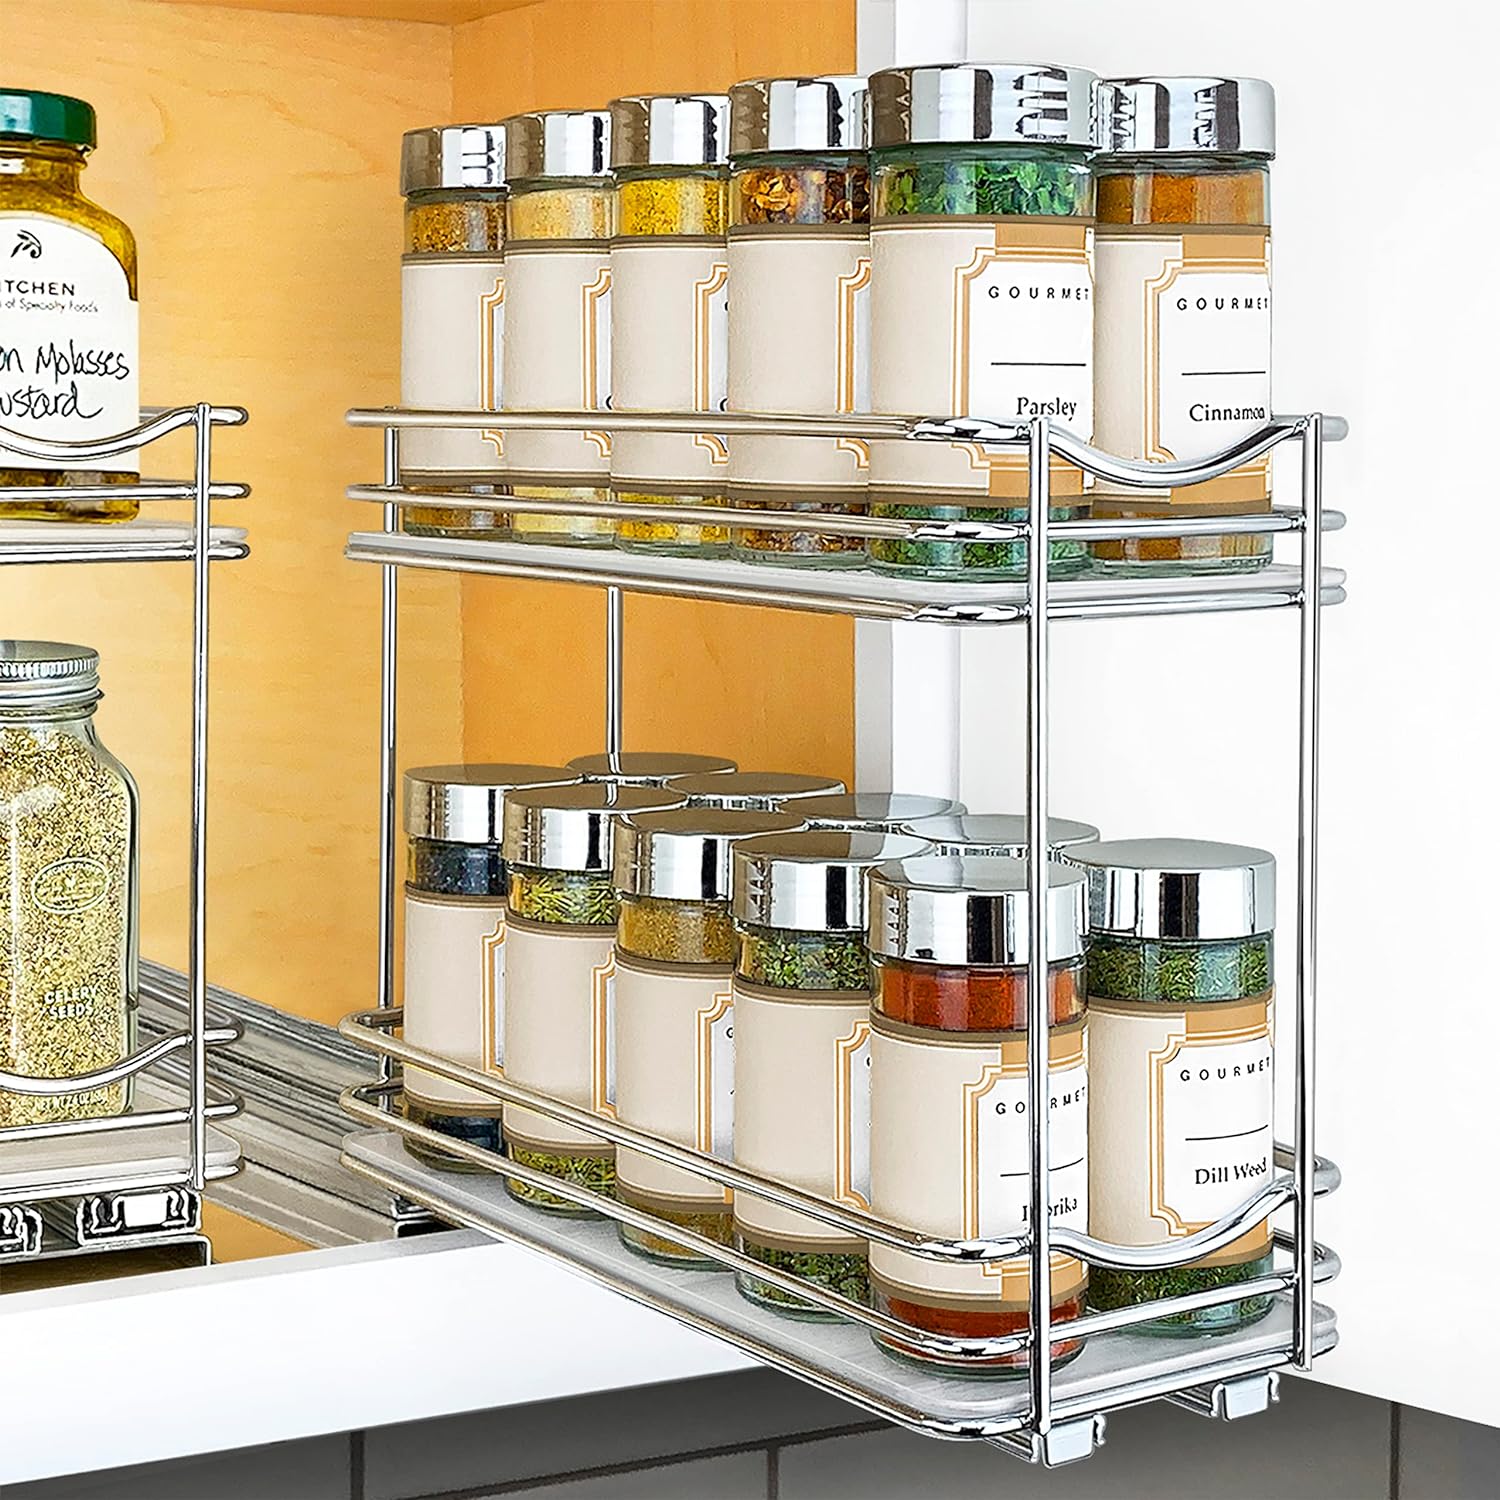 Building a Pull-Out Spice Rack Cabinet Step-By-Step